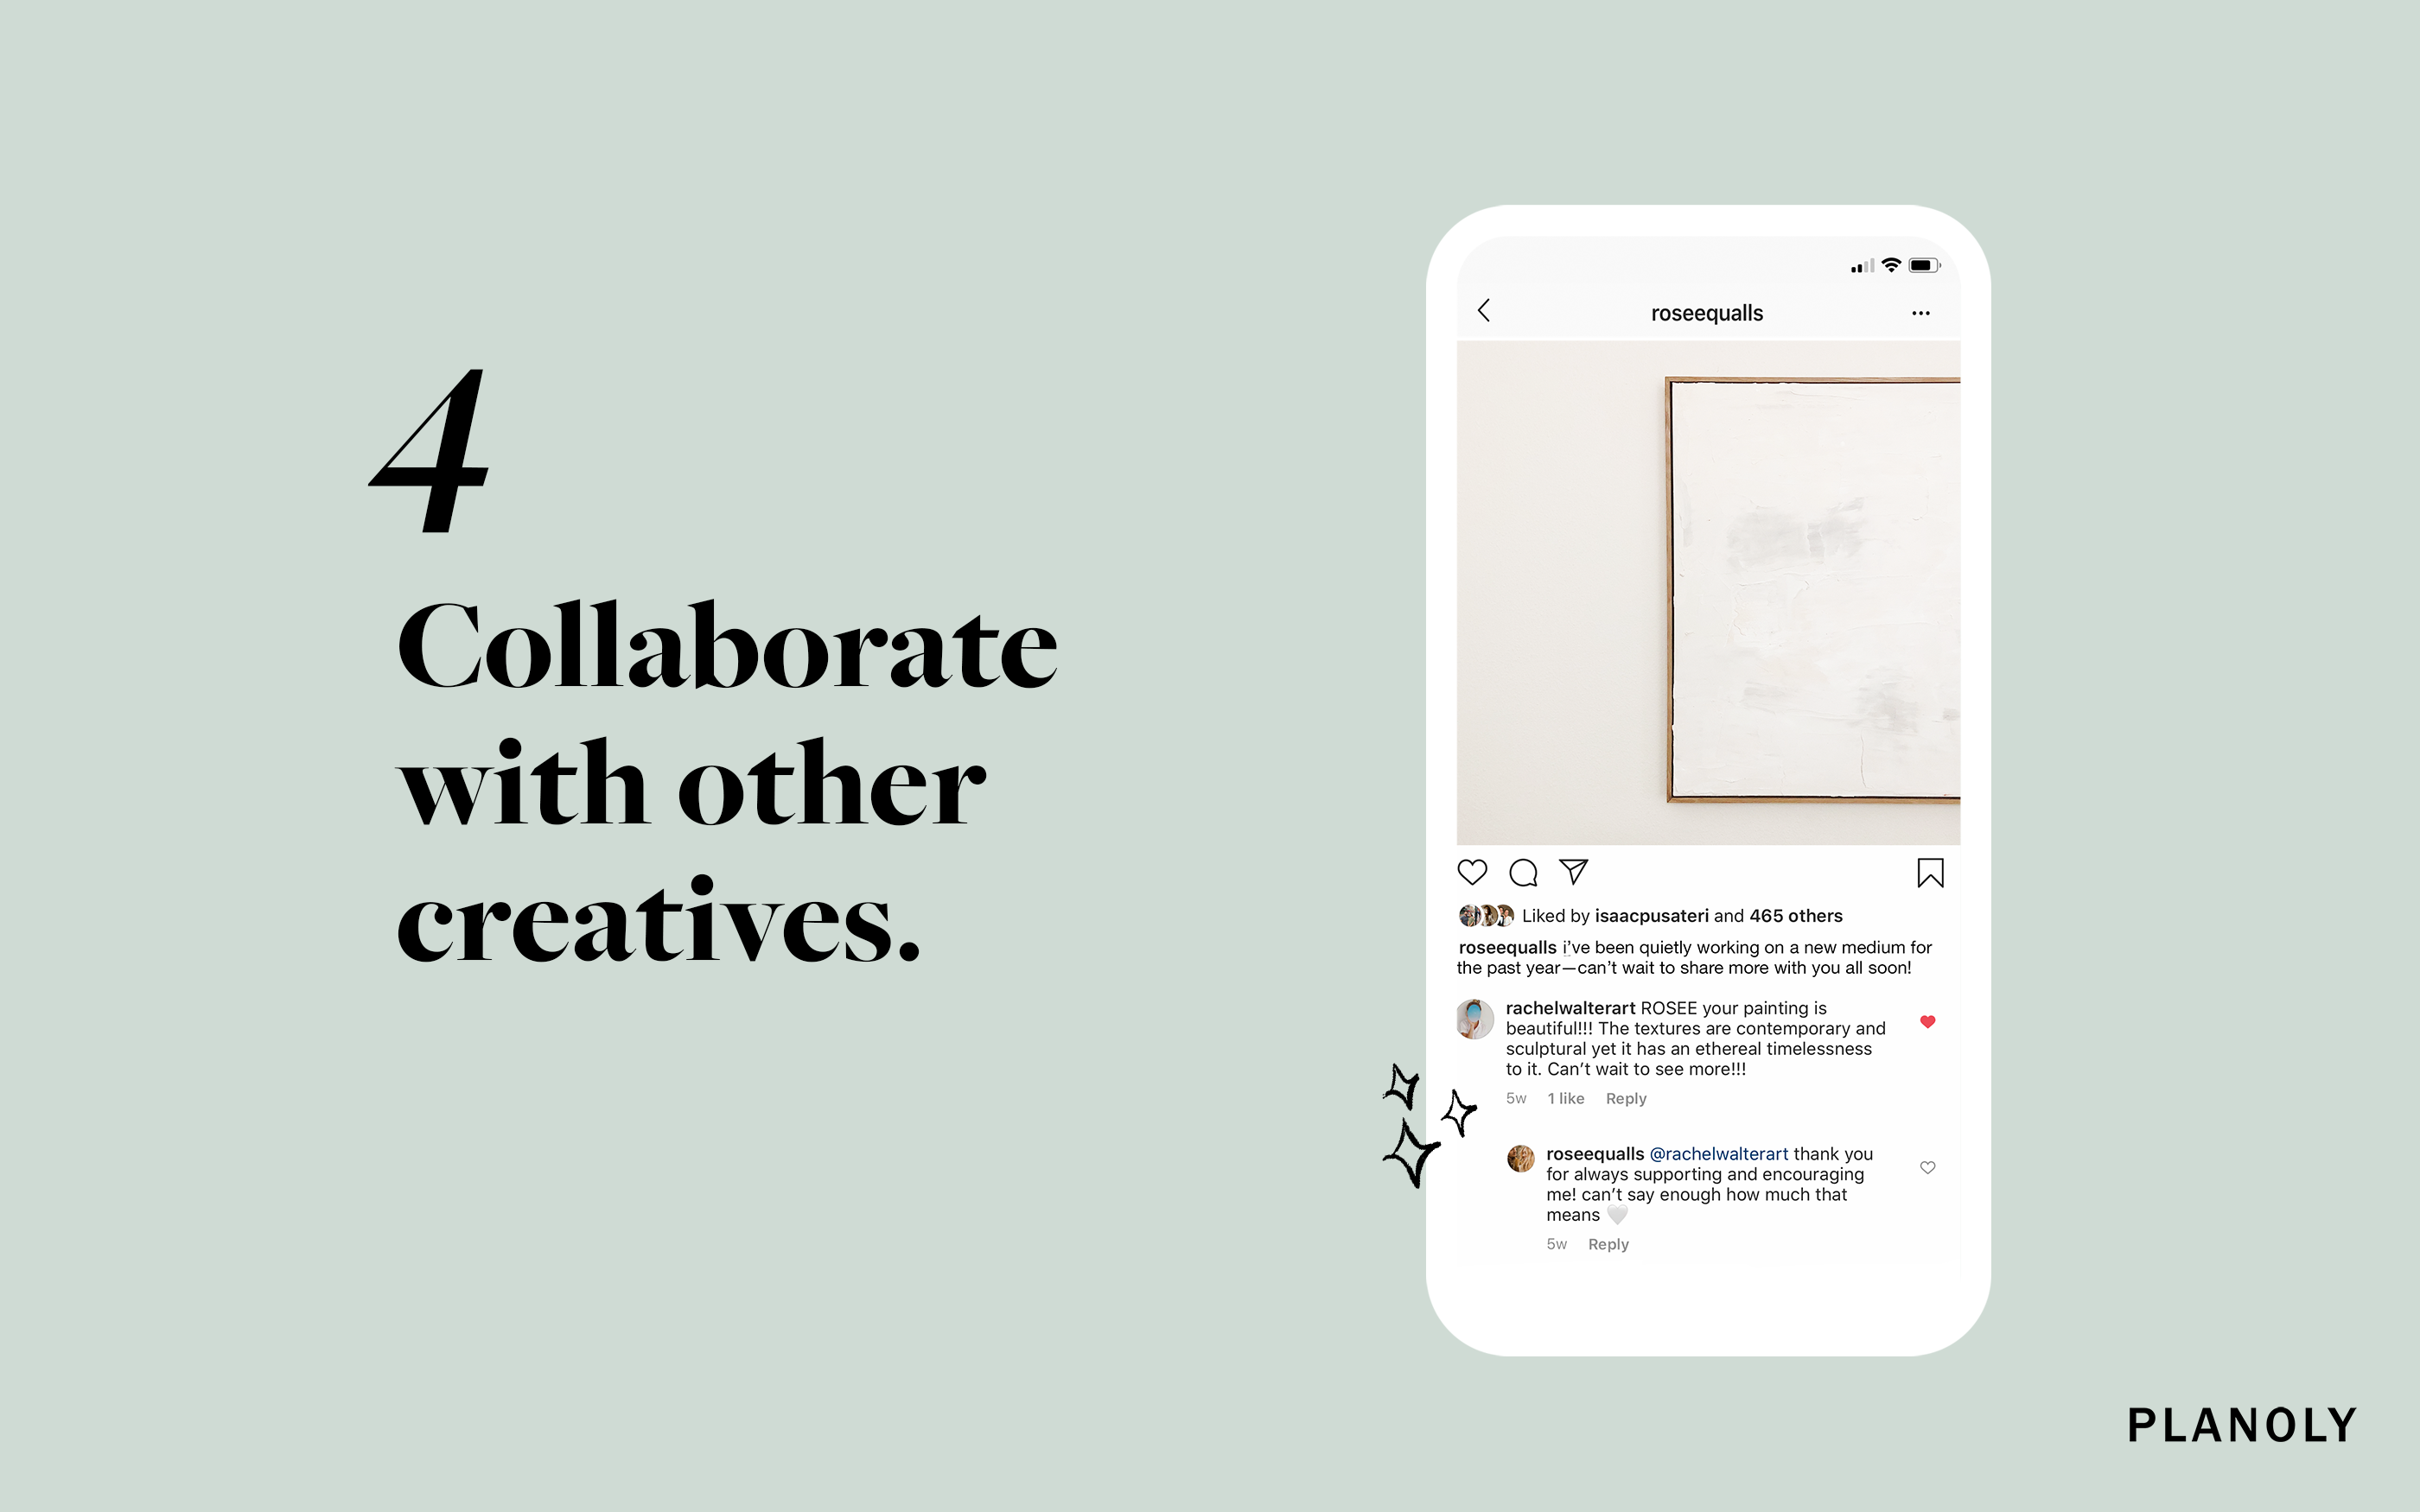 PLANOLY - Blog Post - 4 Easy ways to promote your design work on Instagram - Image 4